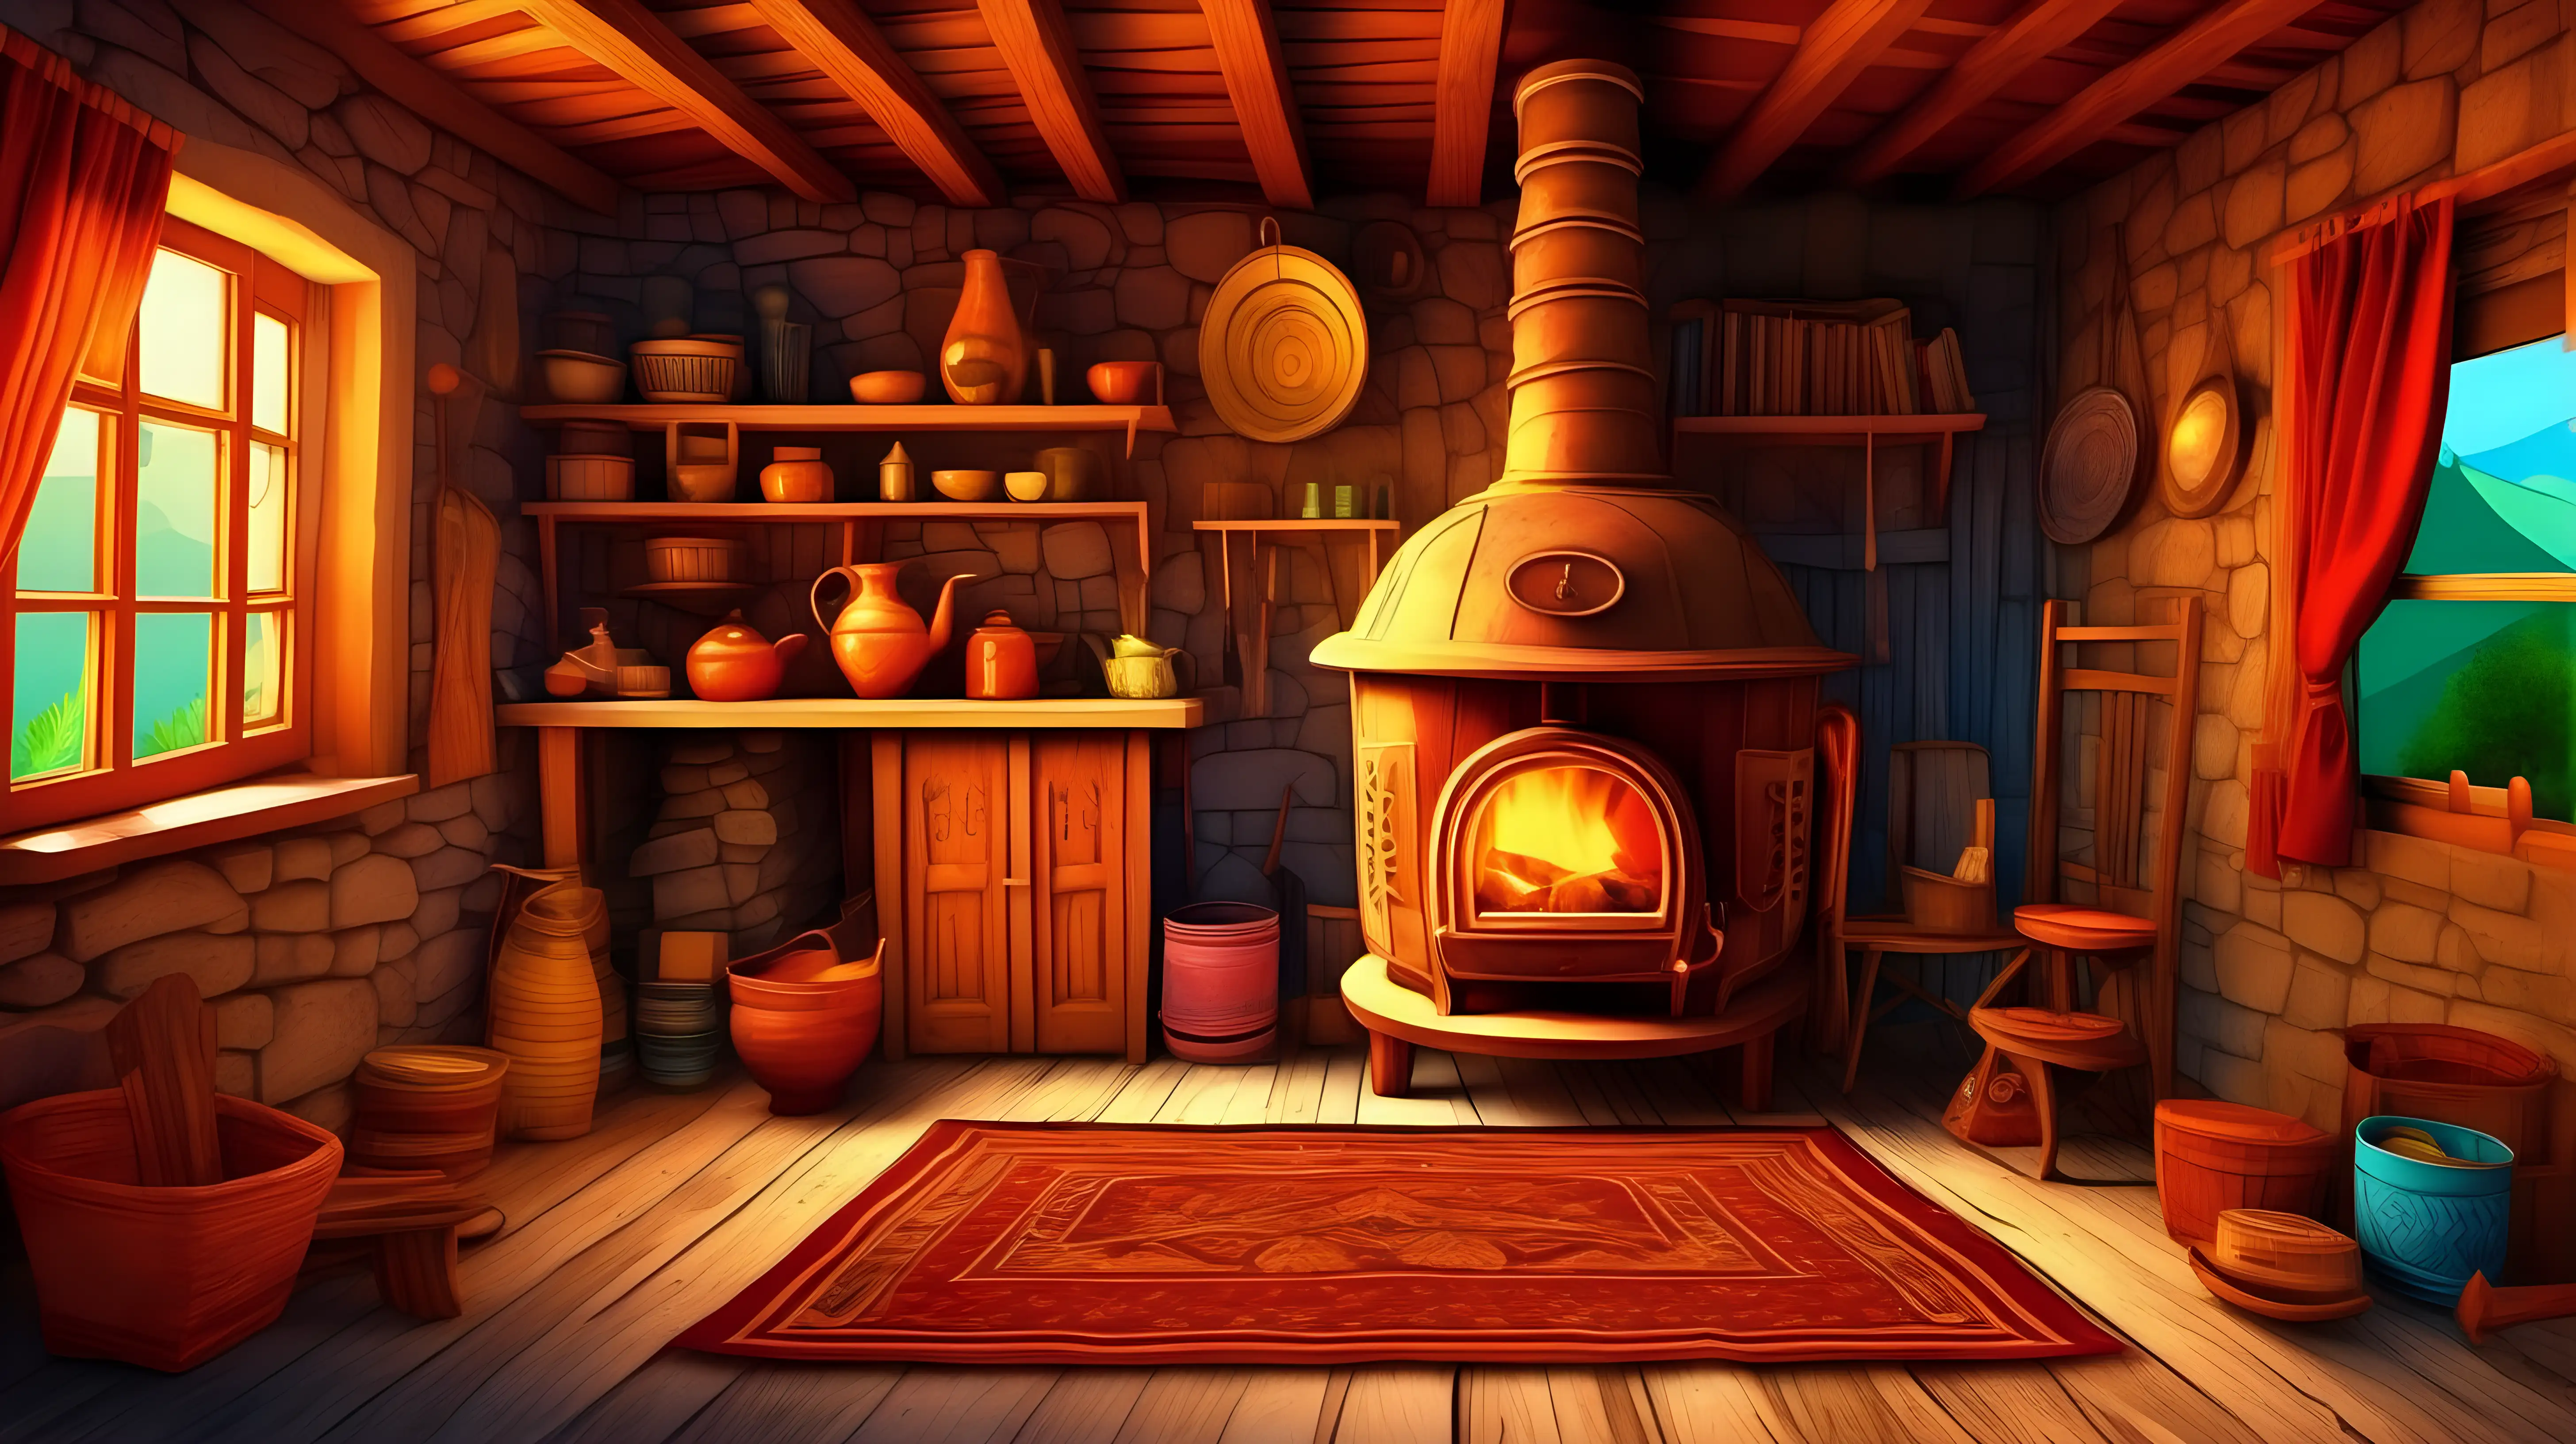 Warm and Cozy Traditional Albanian Home Interior with Wood Stove